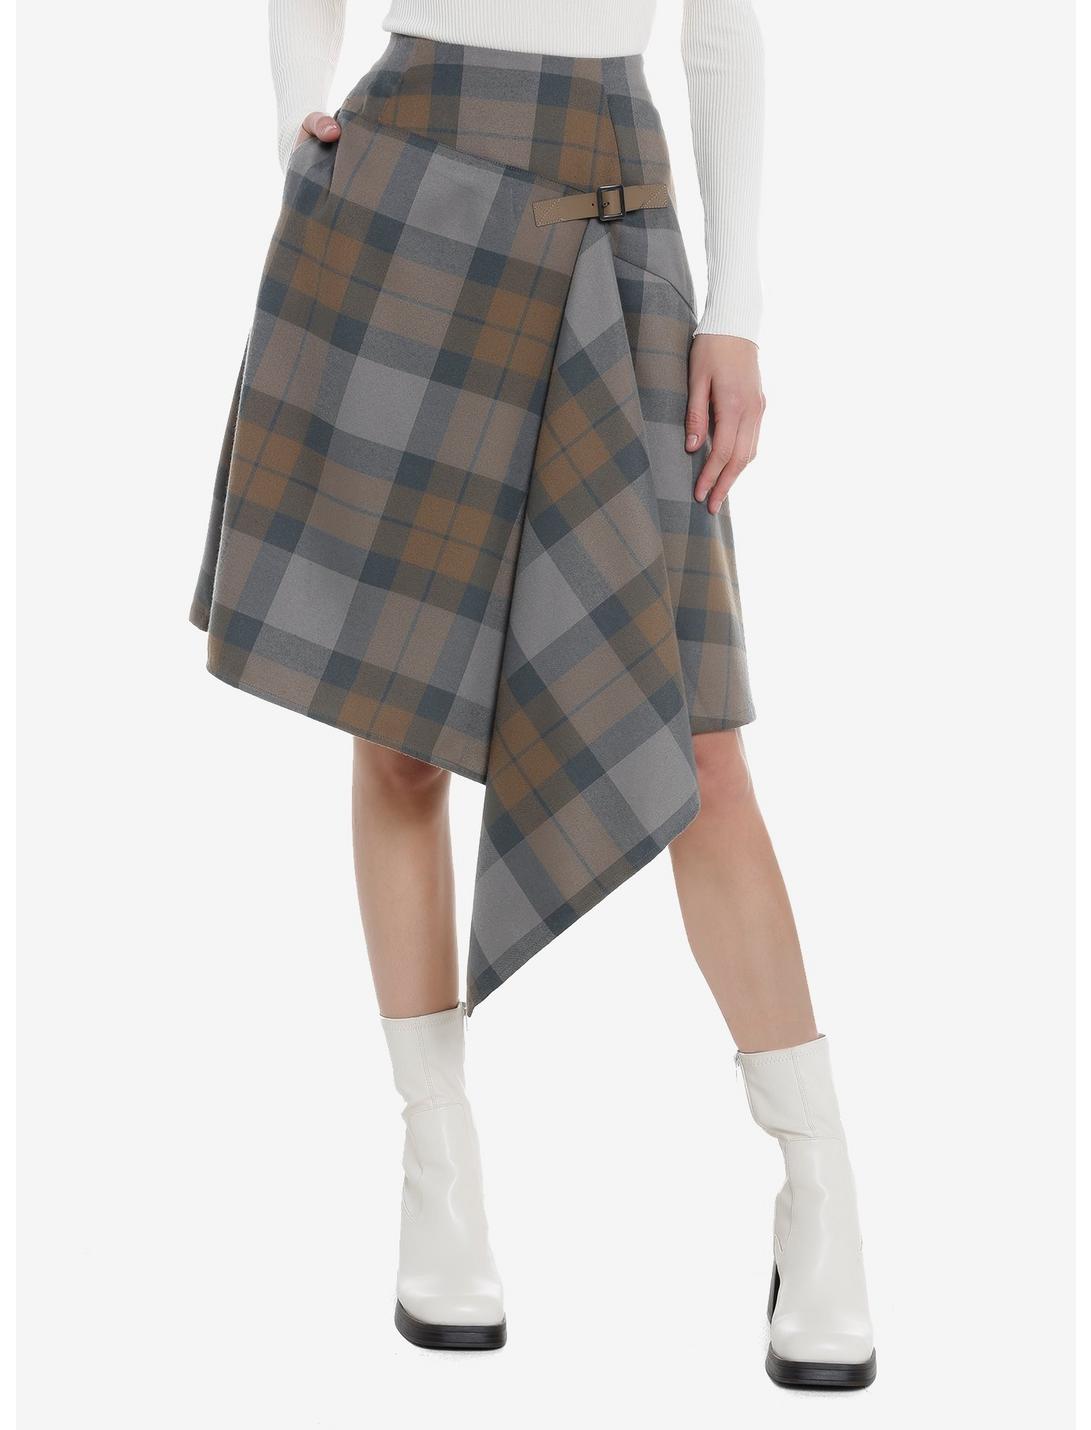 Her Universe Outlander Plaid Waterfall Skirt Her Universe Exclusive, MULTI, hi-res